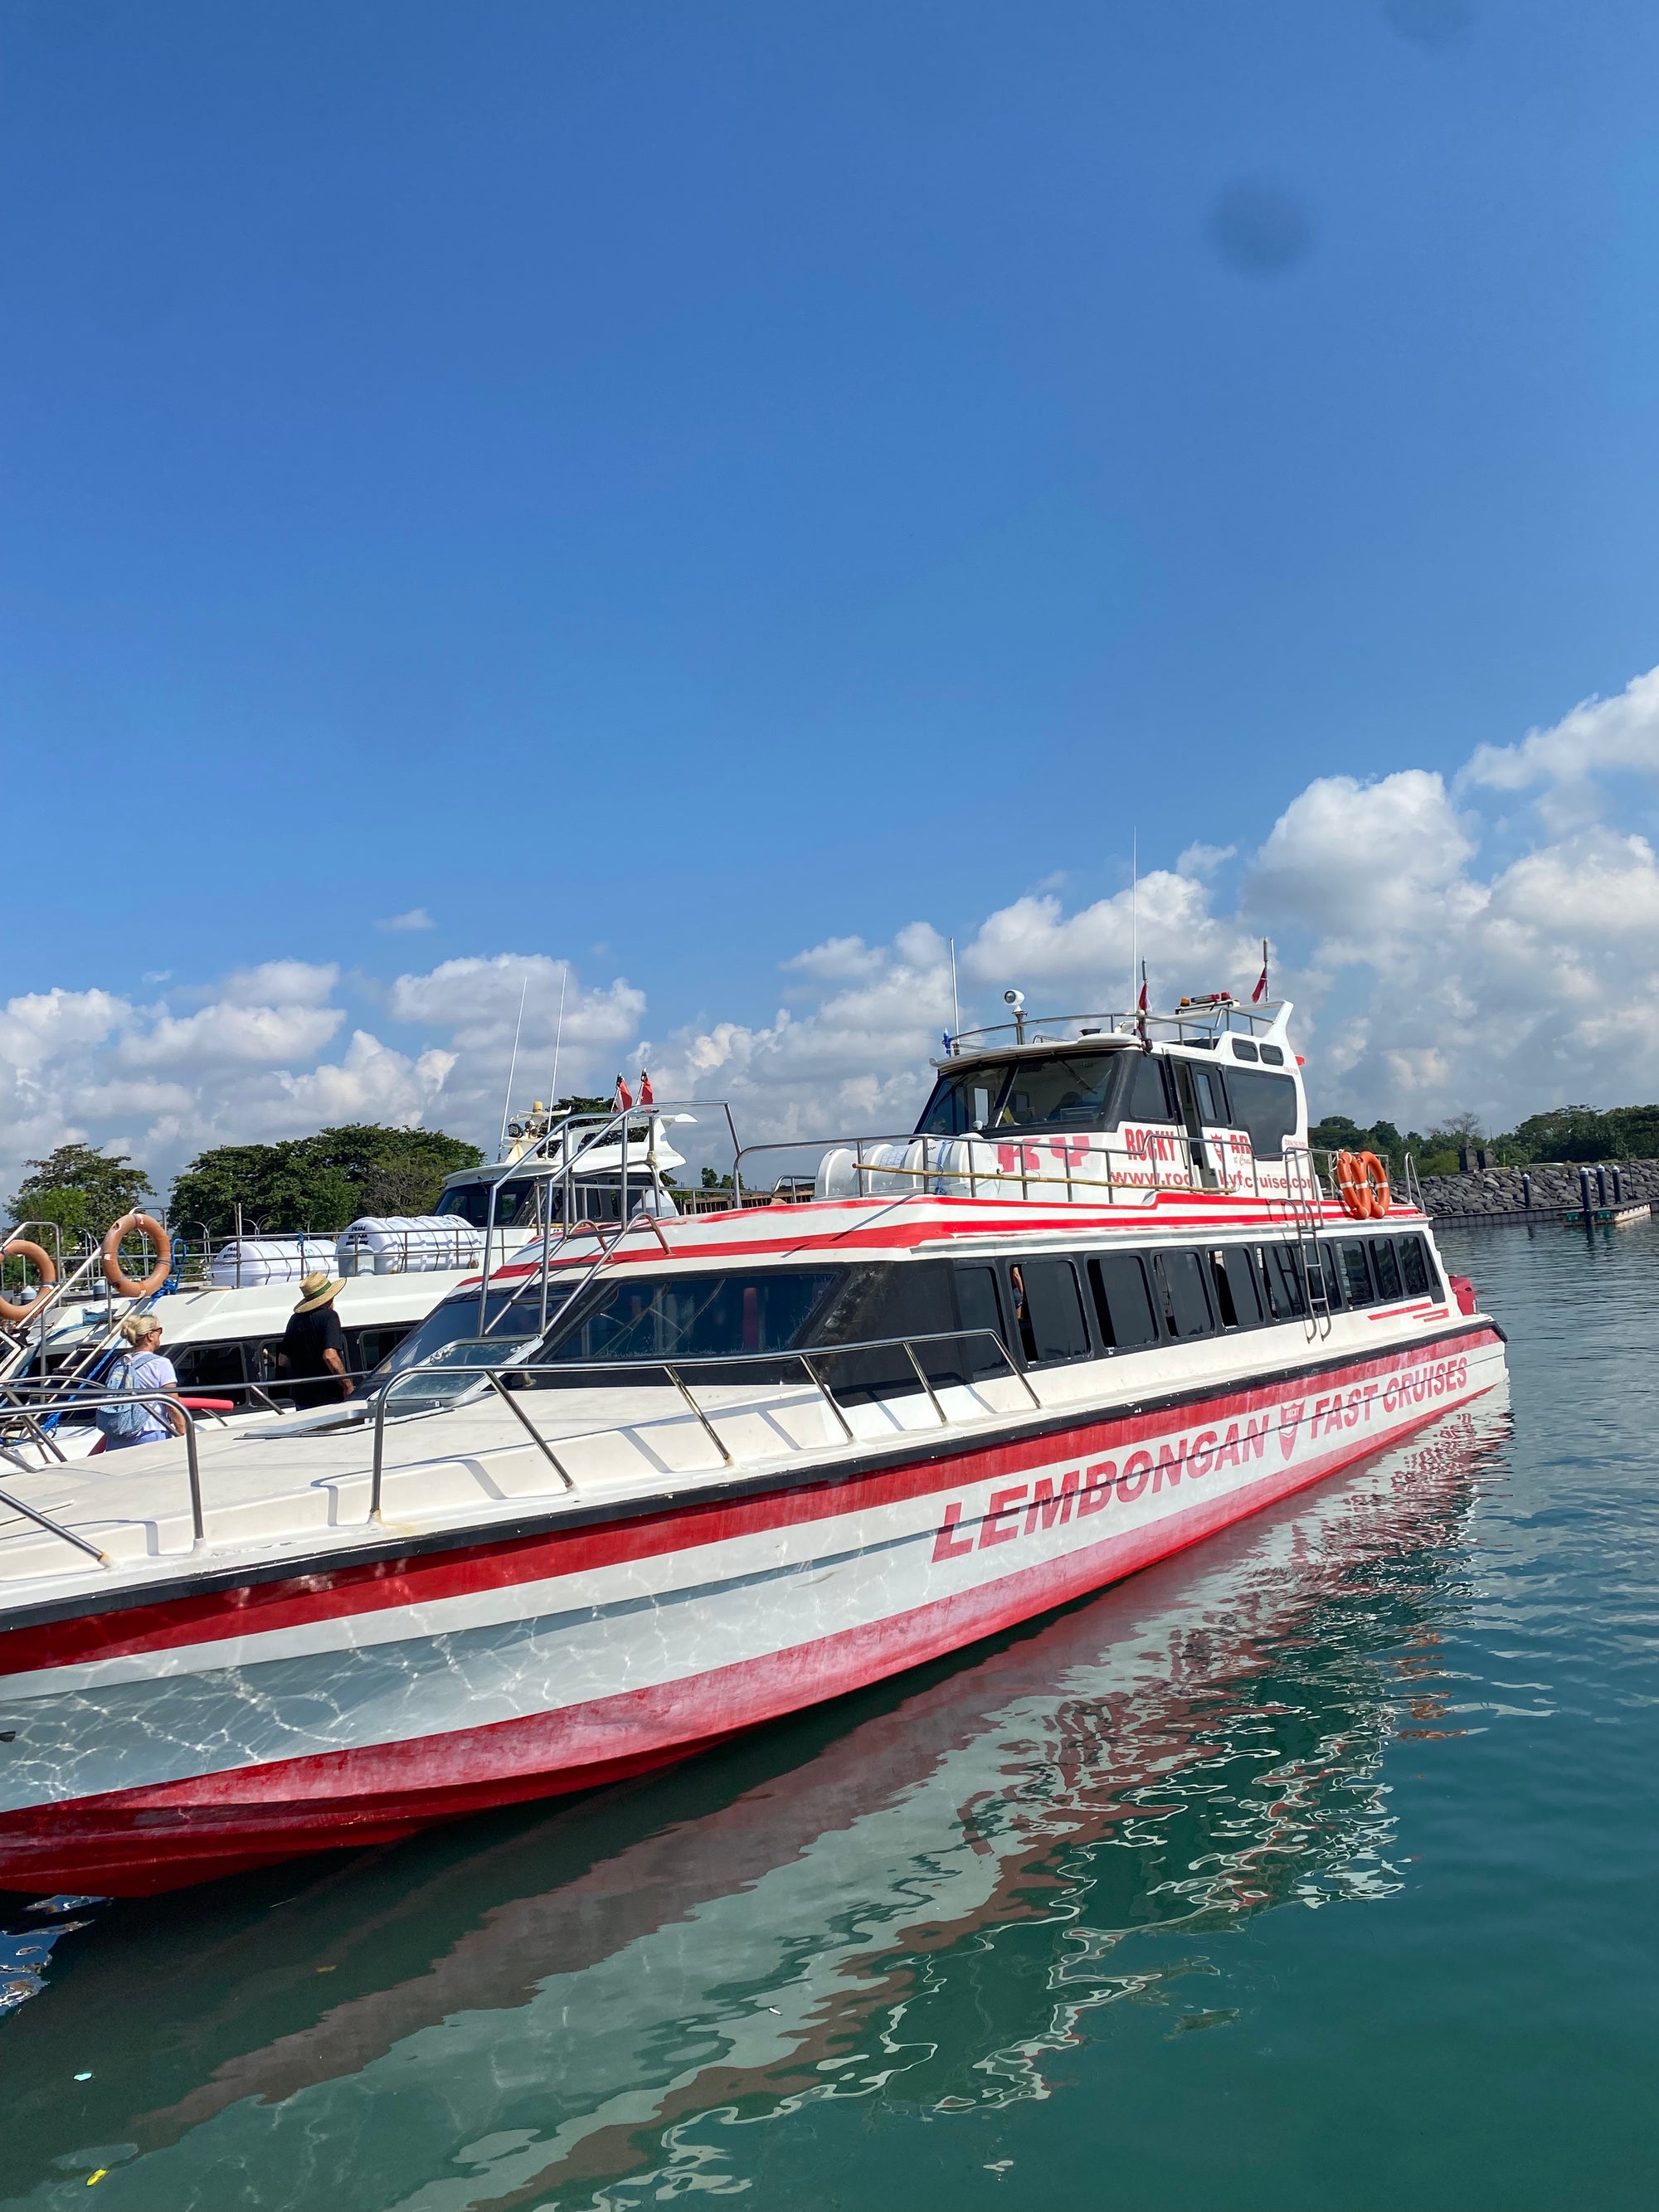 15% OFF: Book your Lembongan boat tickets with Rocky Fast Cruise!